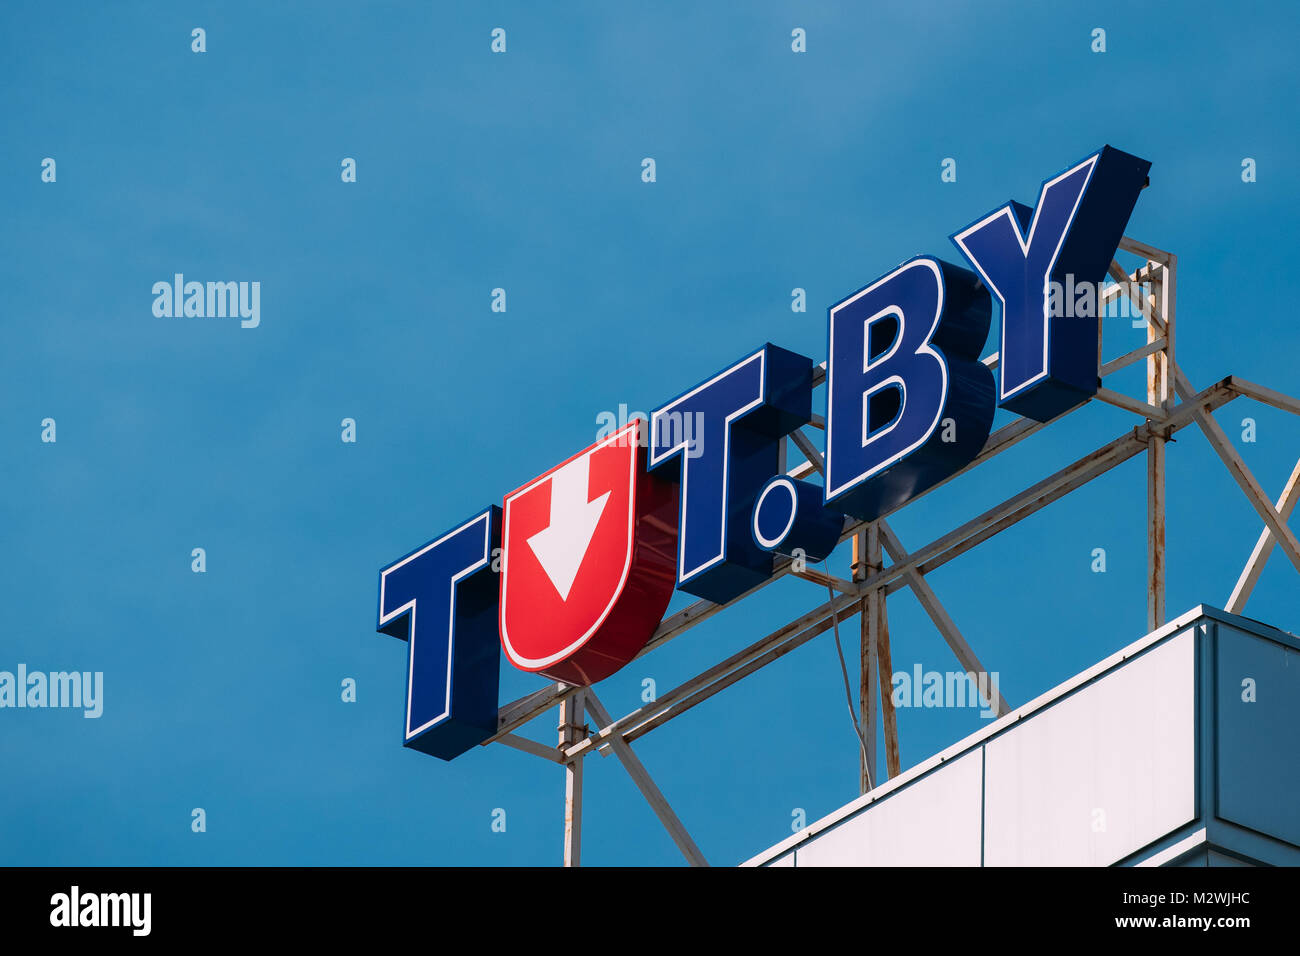 Minsk, Belarus. Logo Logotype Sign Of Tut.By On Roof Of Building On Background Of Blue Sky. Minsk-based Internet Portal In Belarusian And Russian Lang Stock Photo